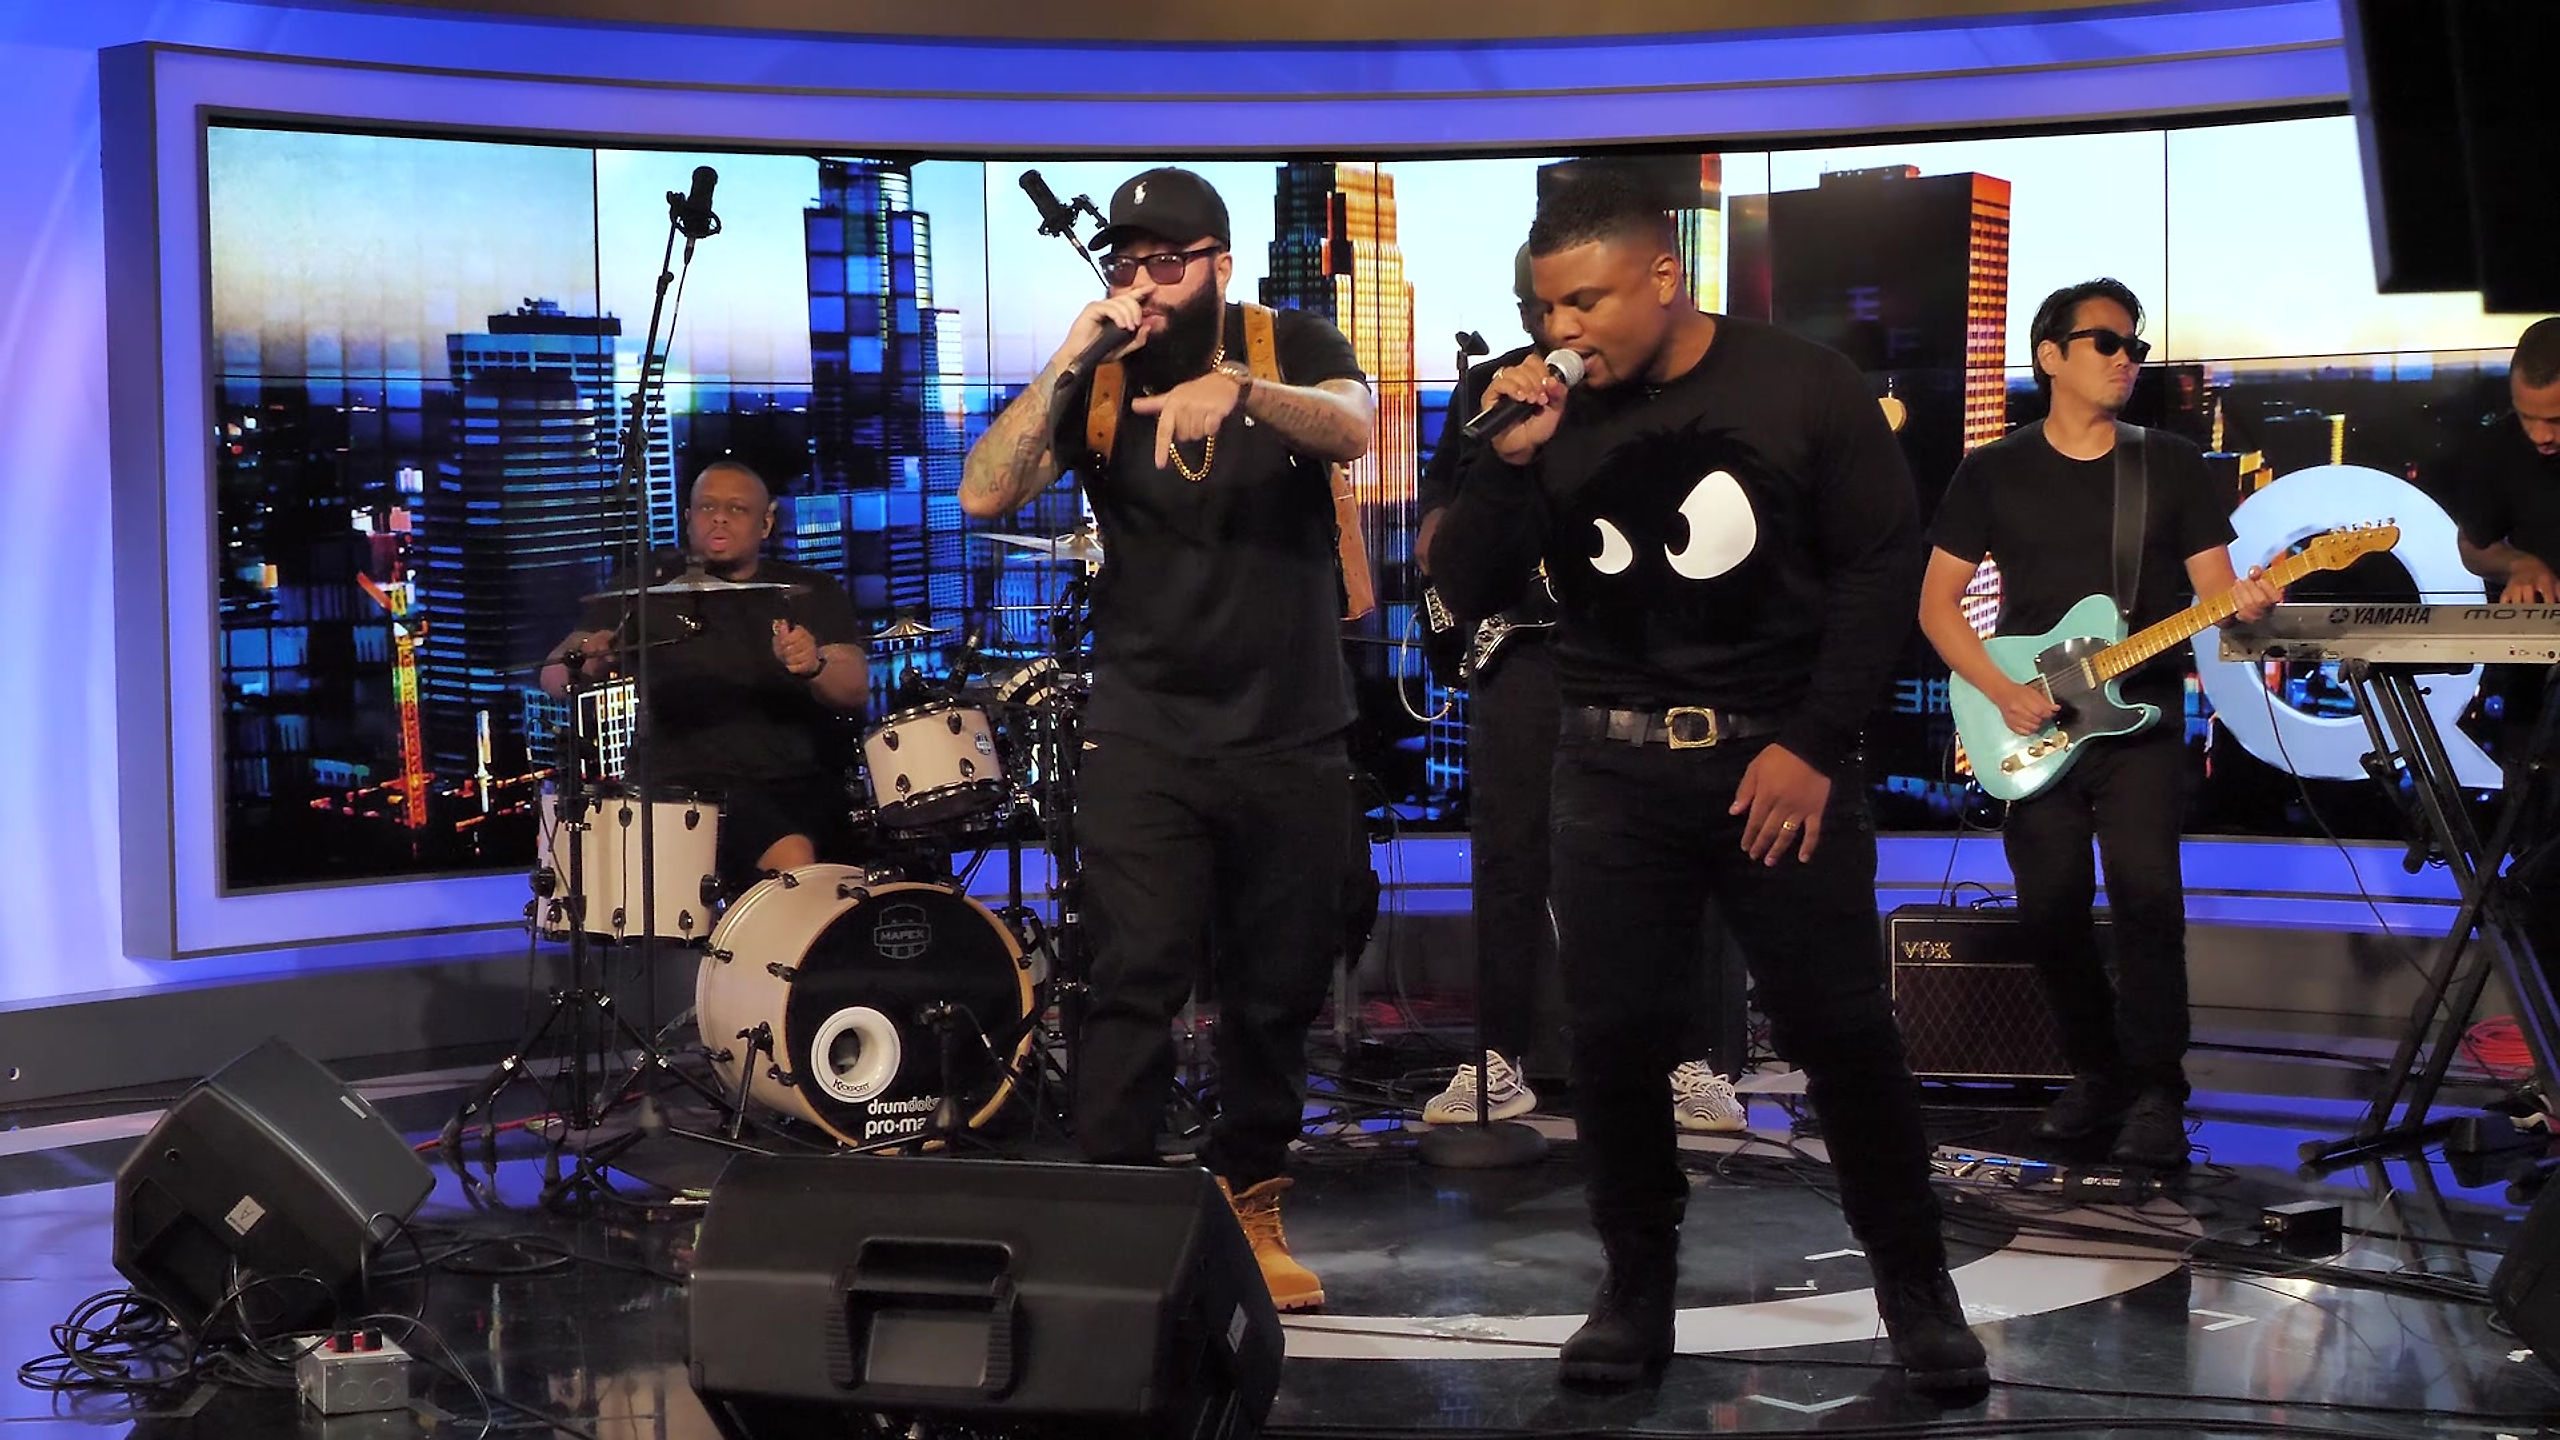 Bandit The Rapper and James Knight Performing Hit Single "What You Need" Live on The Q Show